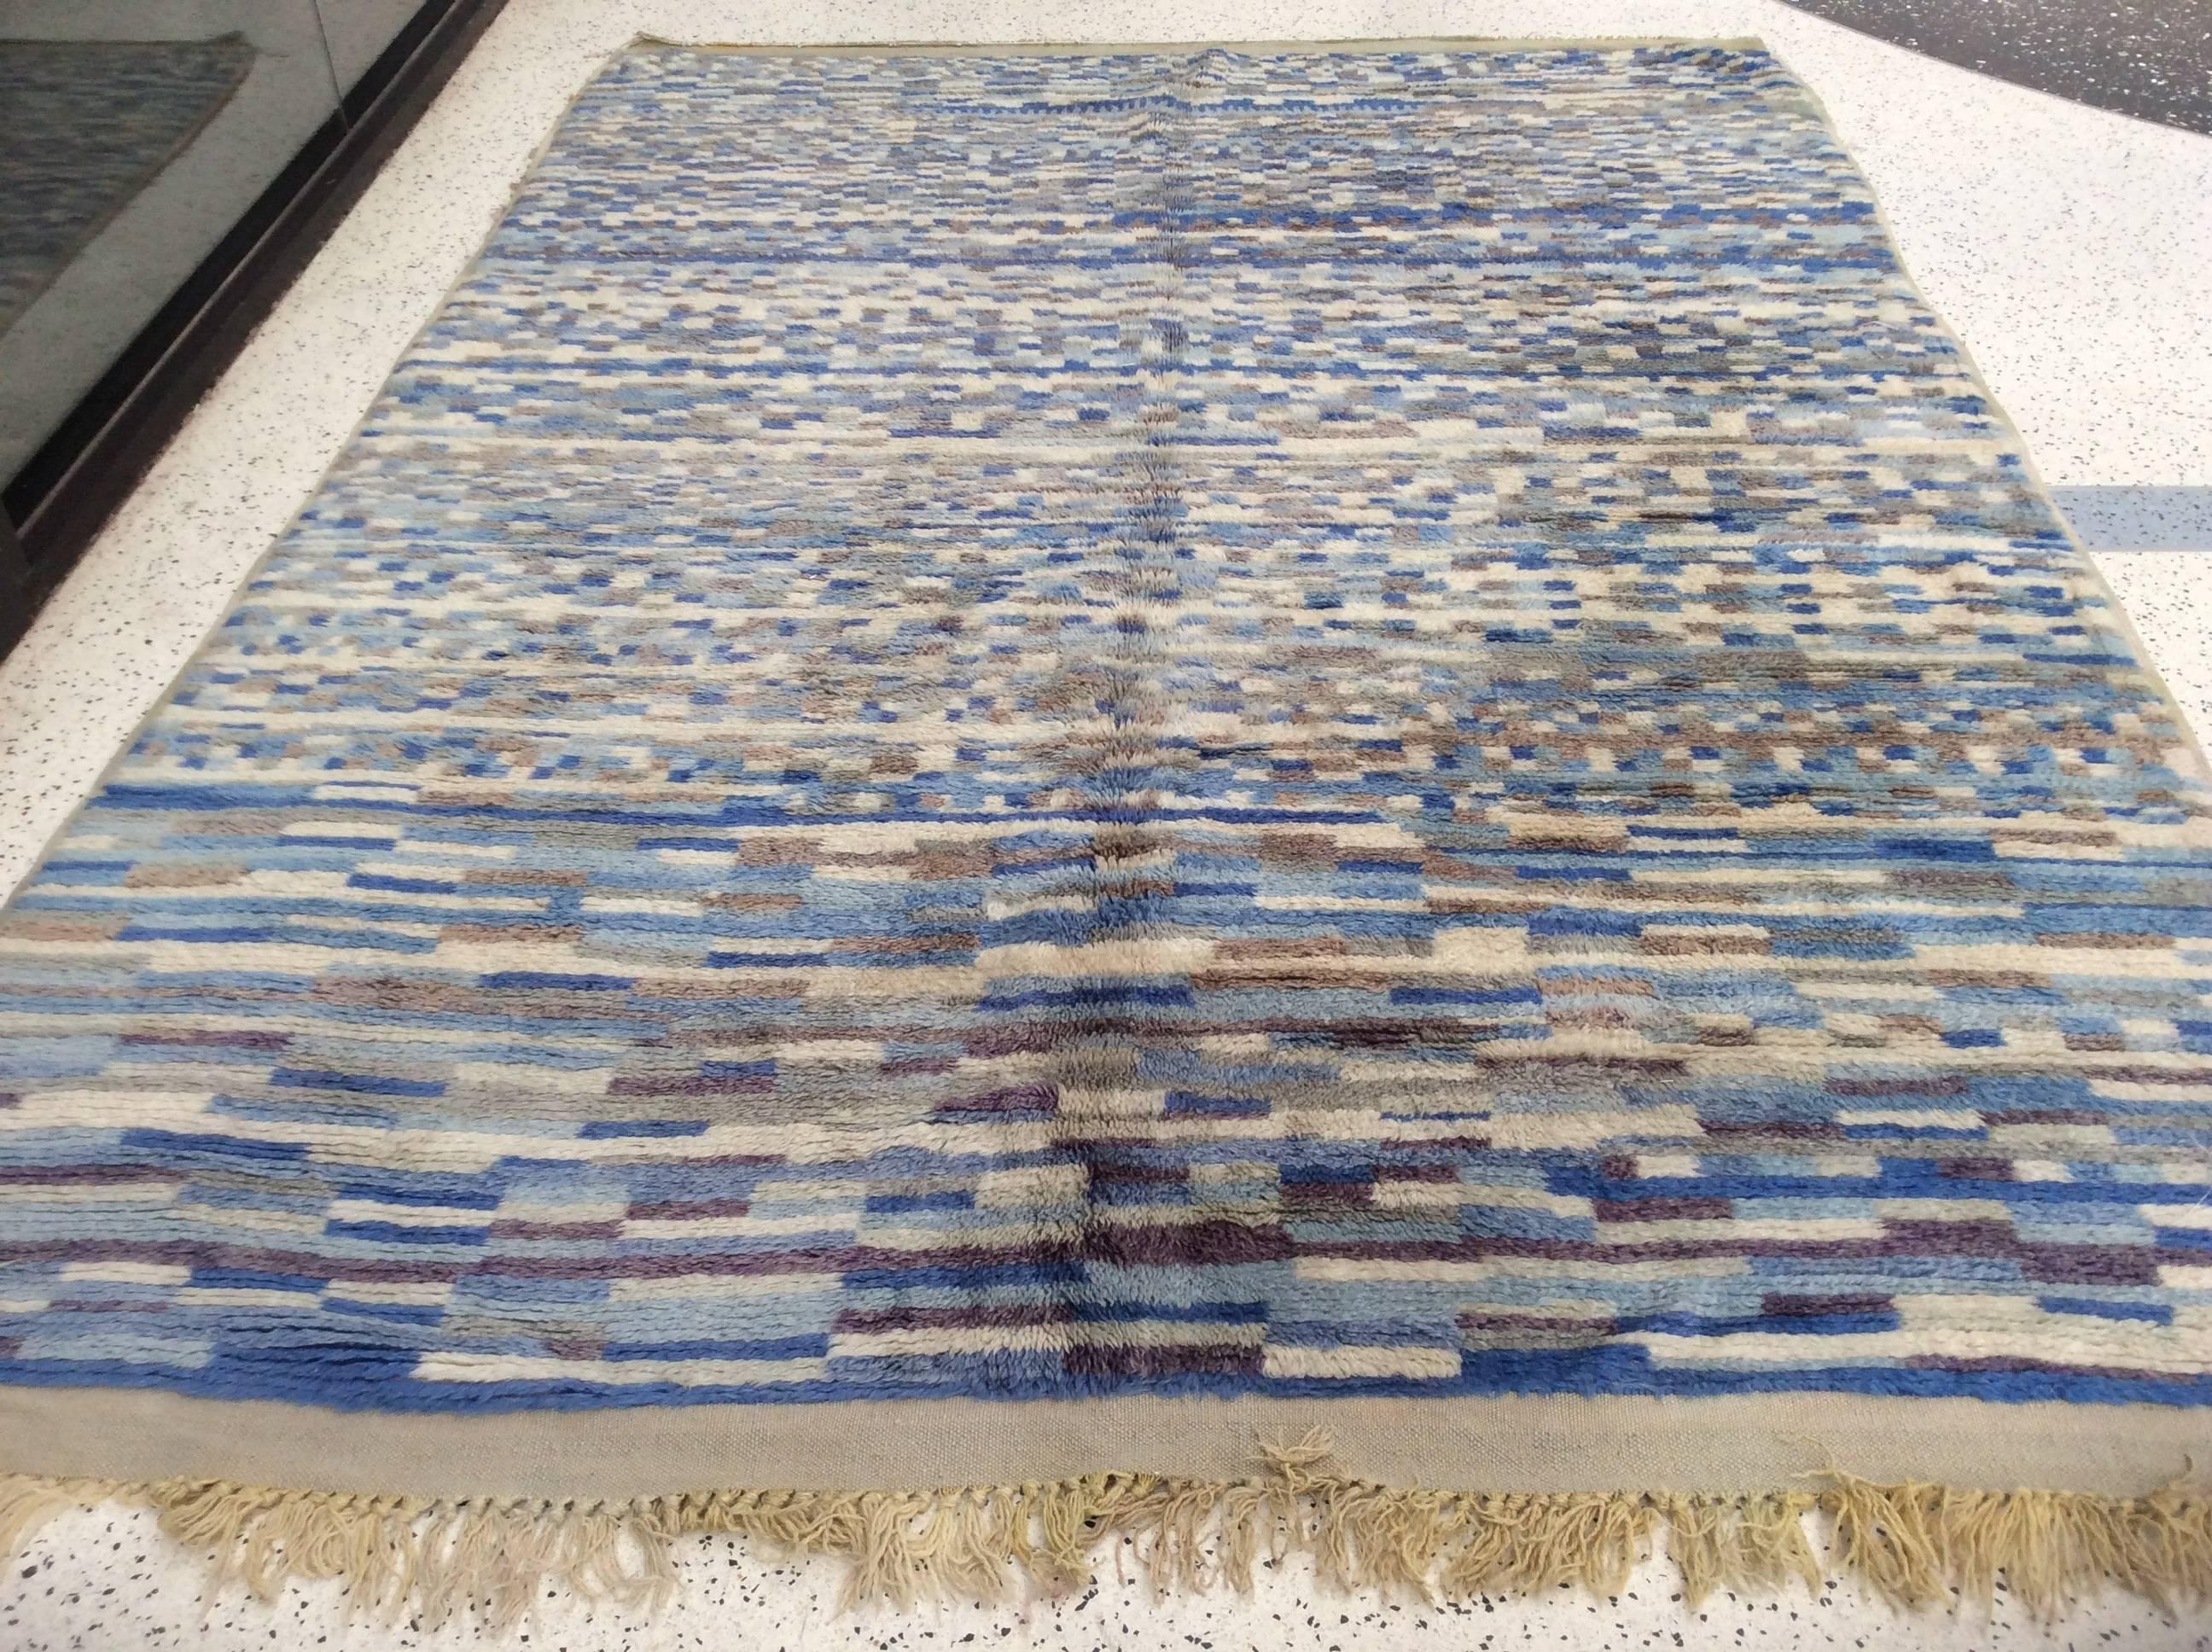 Moroccan Berber rug in shades of blue

A weaving technique that has been passed down from generations to generations makes Moroccan Berber rug such a fine addition to your collection. It is made of luxurious hand-spun wool by the high atlas tribe,